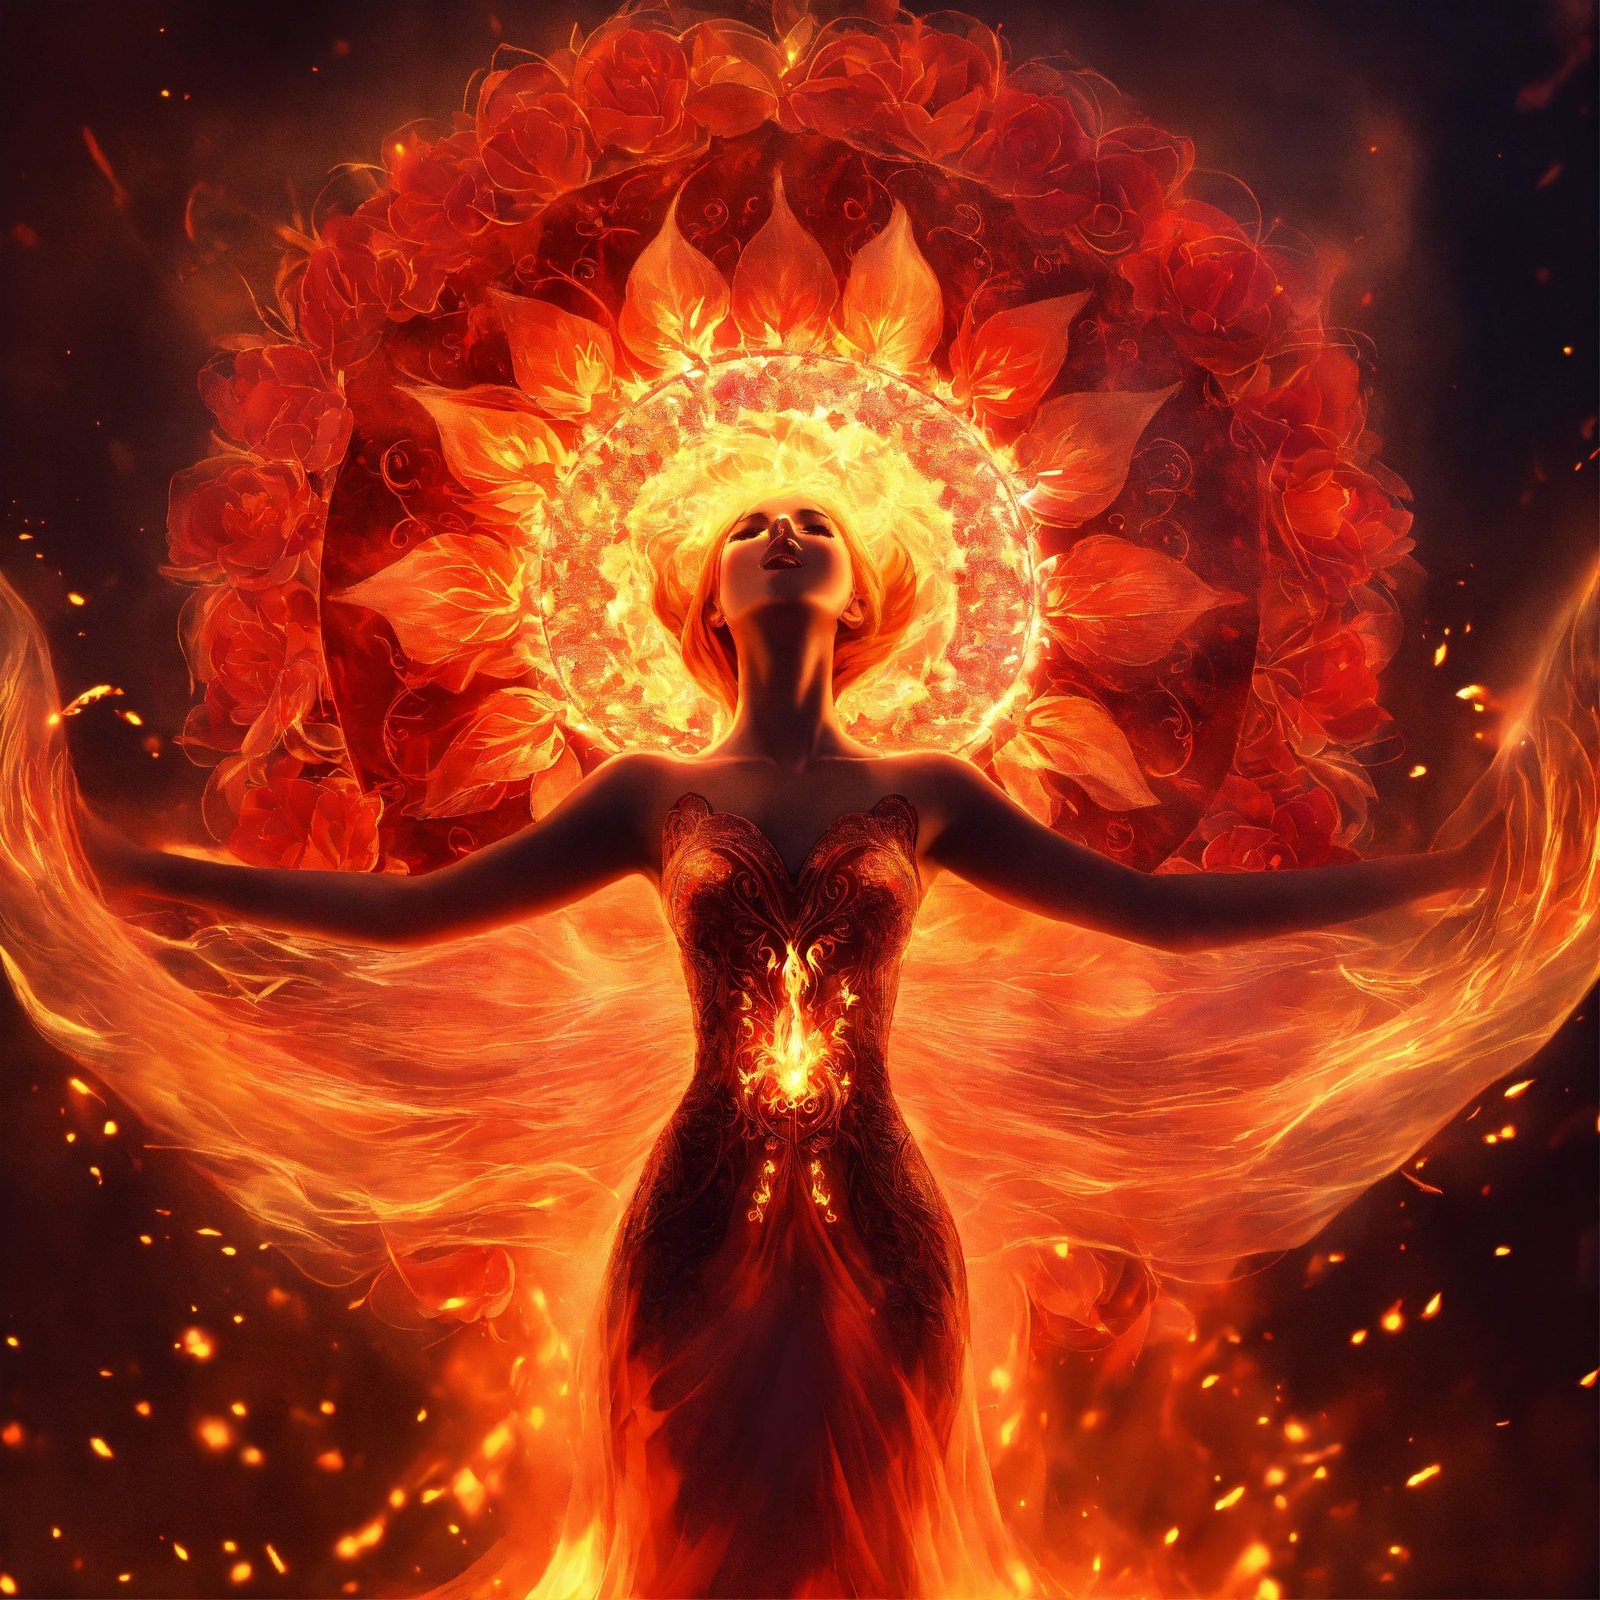 Fantasy, mesmerizing design, ascending spirit woman, spirit being's arms spread out, red body, transparent radiant light on her body, fire flame at the end of each arm, beautiful fire flowers around the perimeter